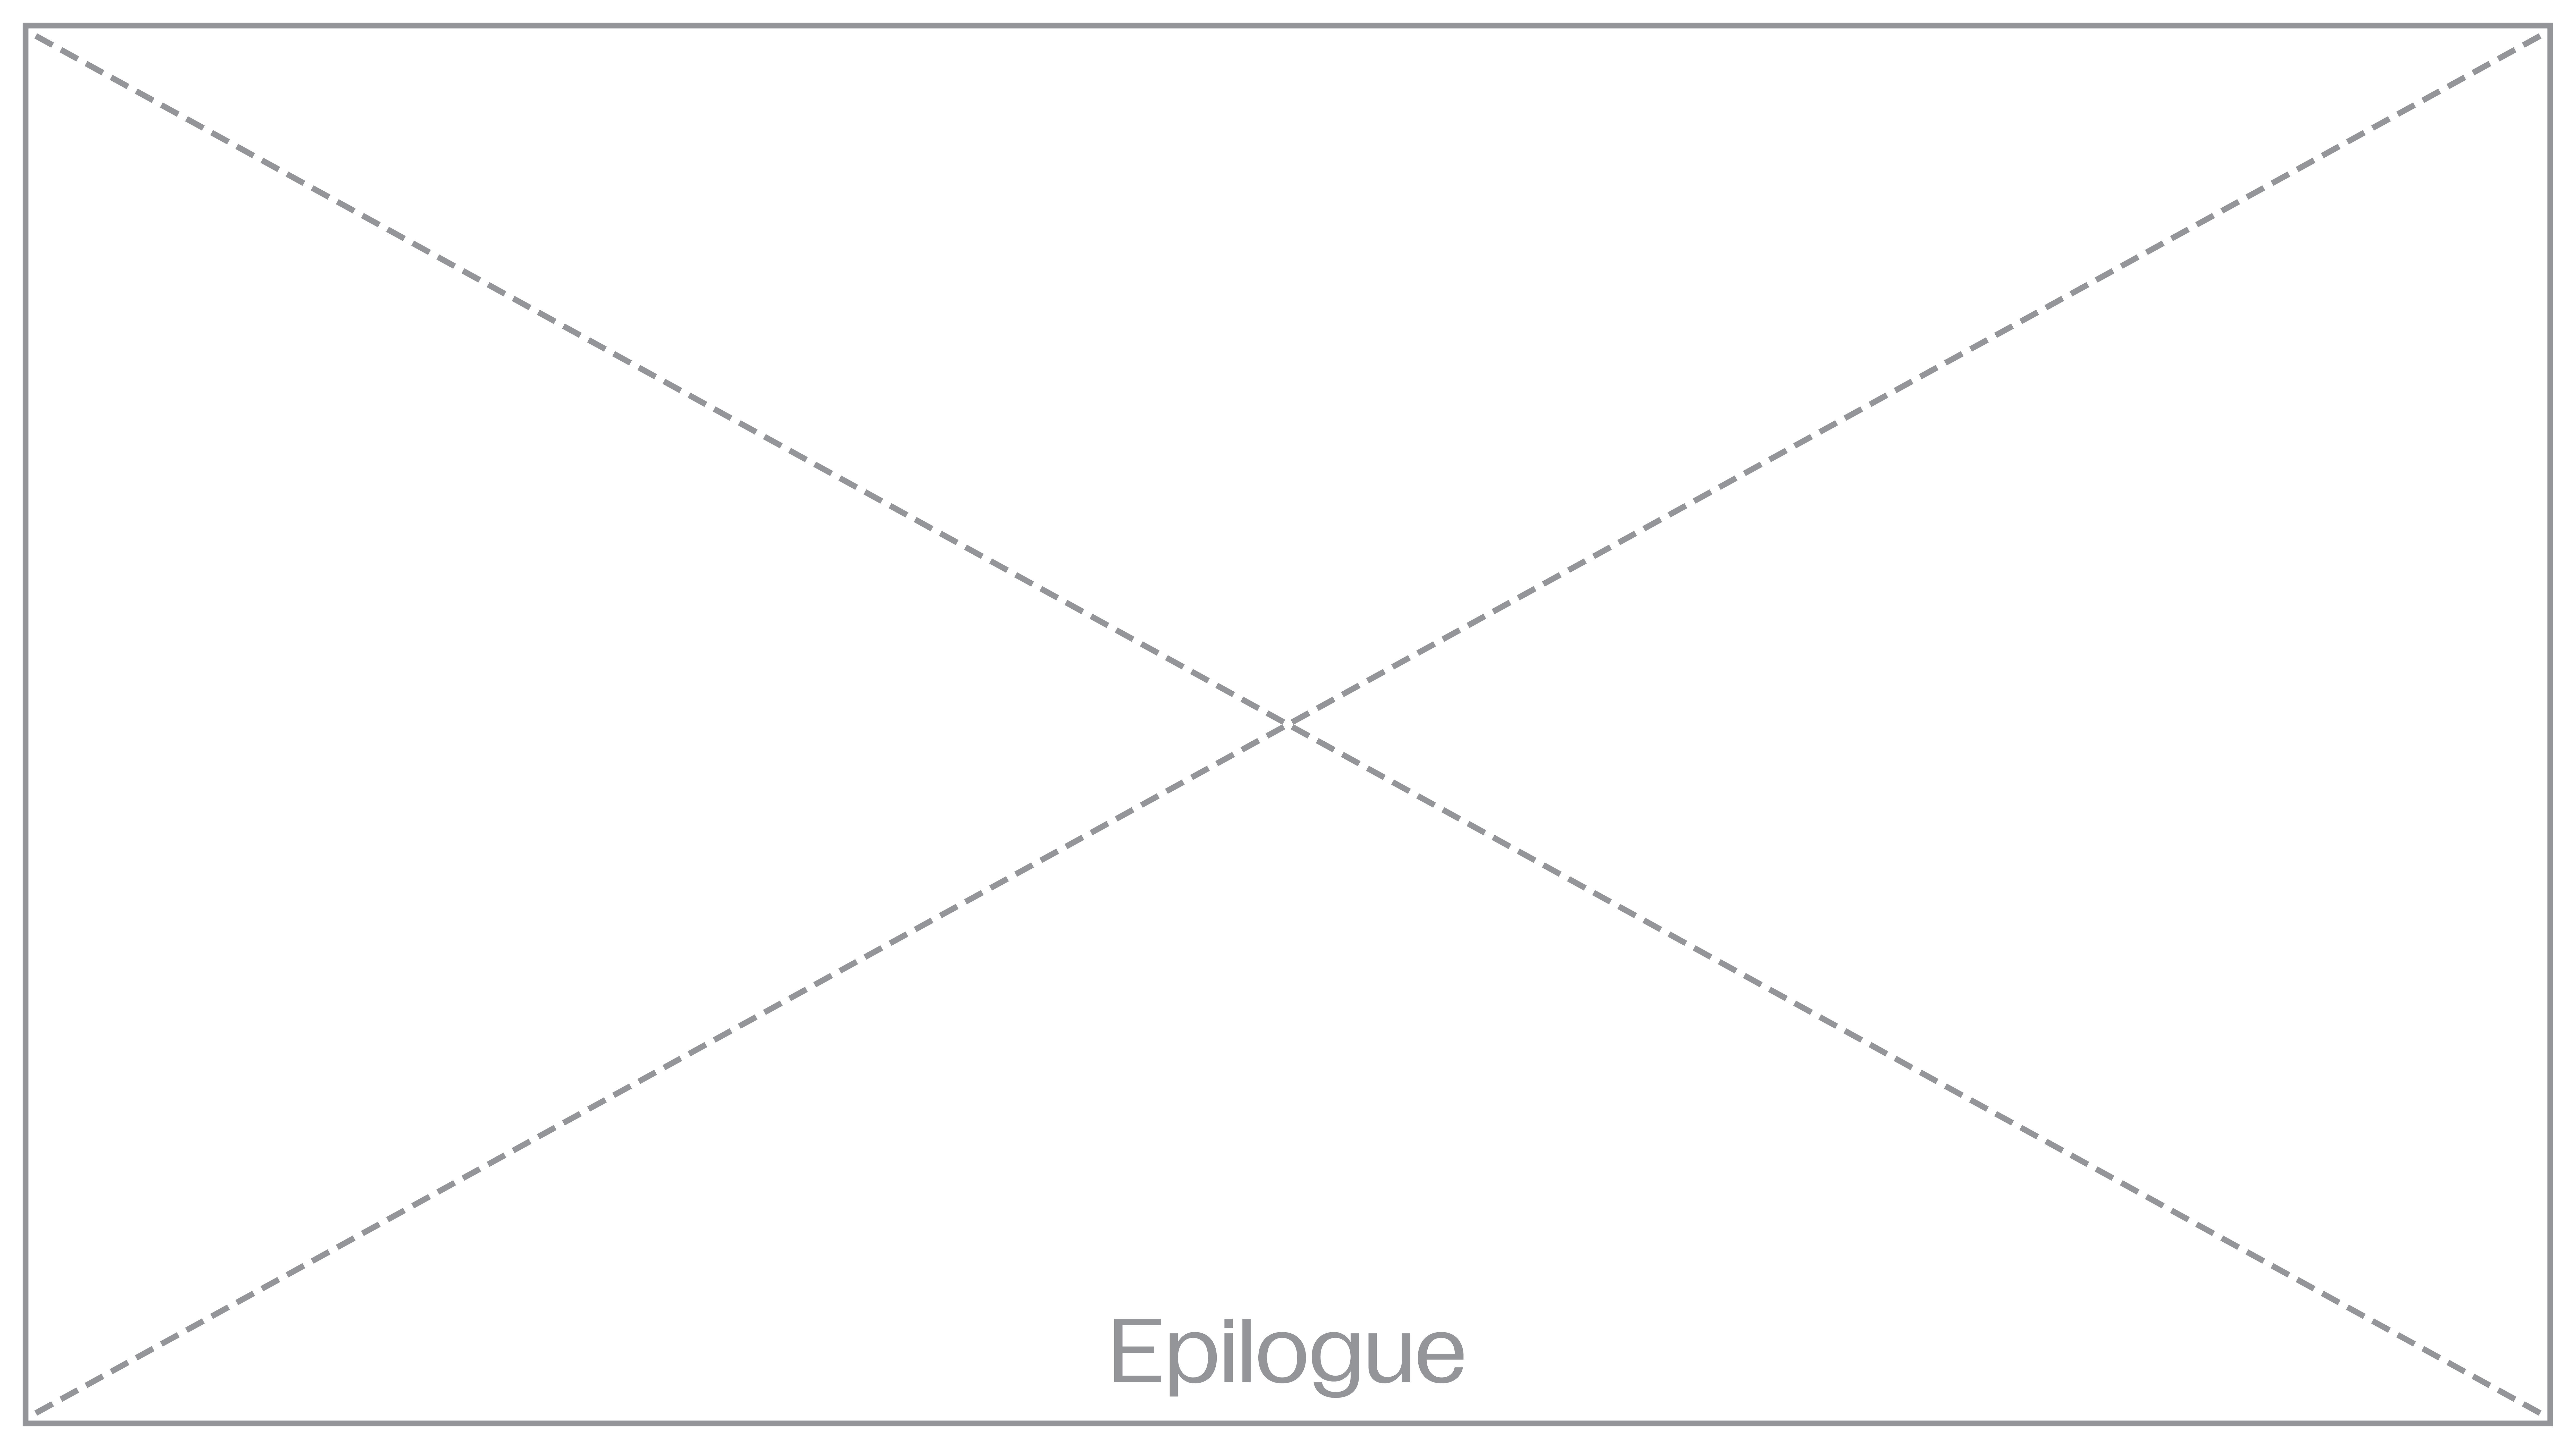 The image: a white rectangle crossed diagonally with dashed gray lines. At the bottom, the inscription is in gray "Epilogue"